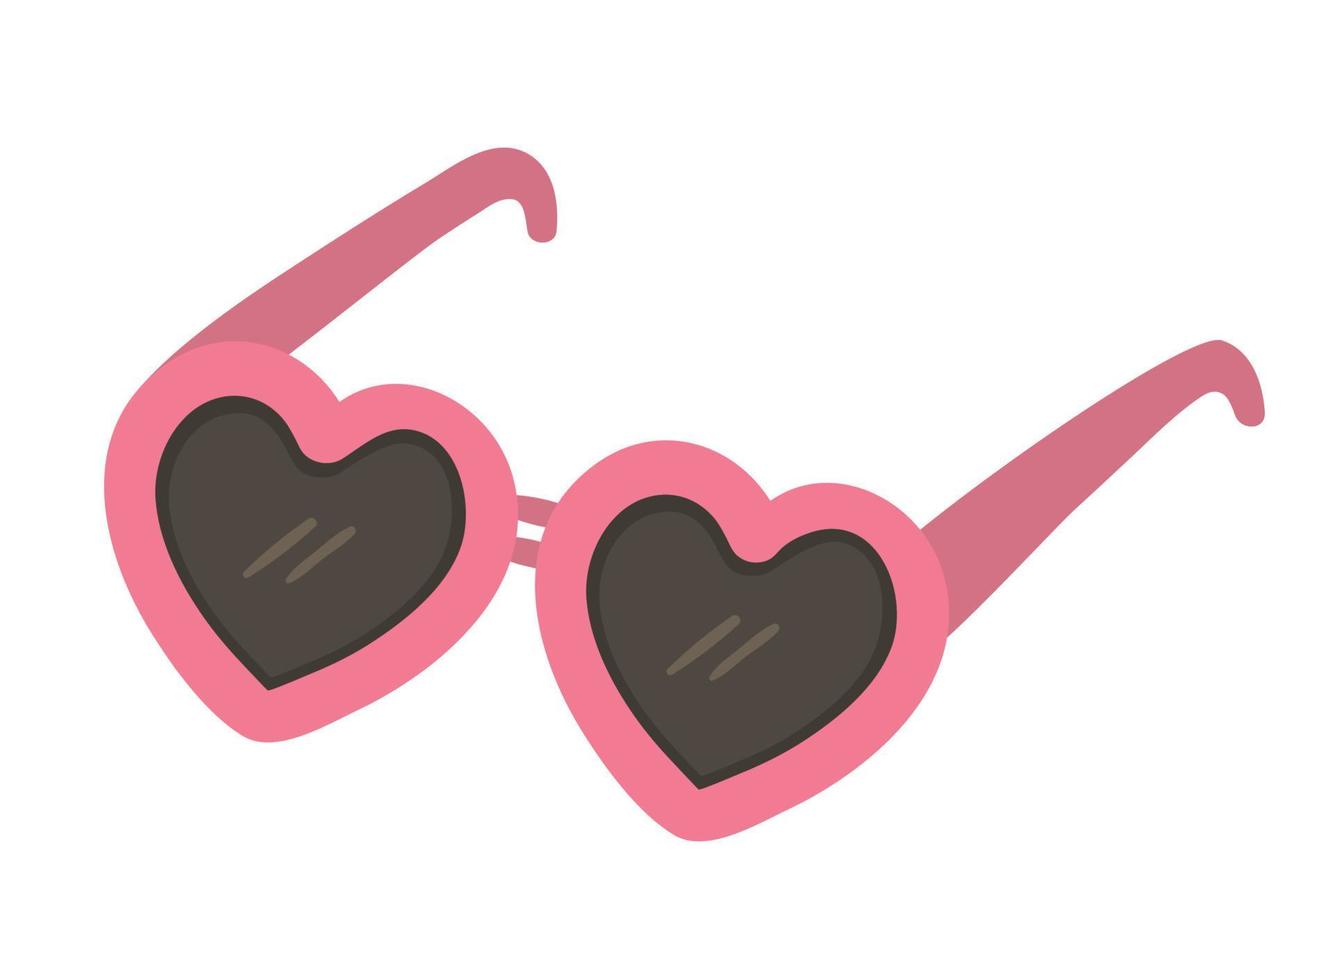 Vector sunglasses isolated on white background. Pink summer sun shielding glasses clipart element. Heart shaped spectacles. Cute flat accessory illustration for kids. Vacation beach object.